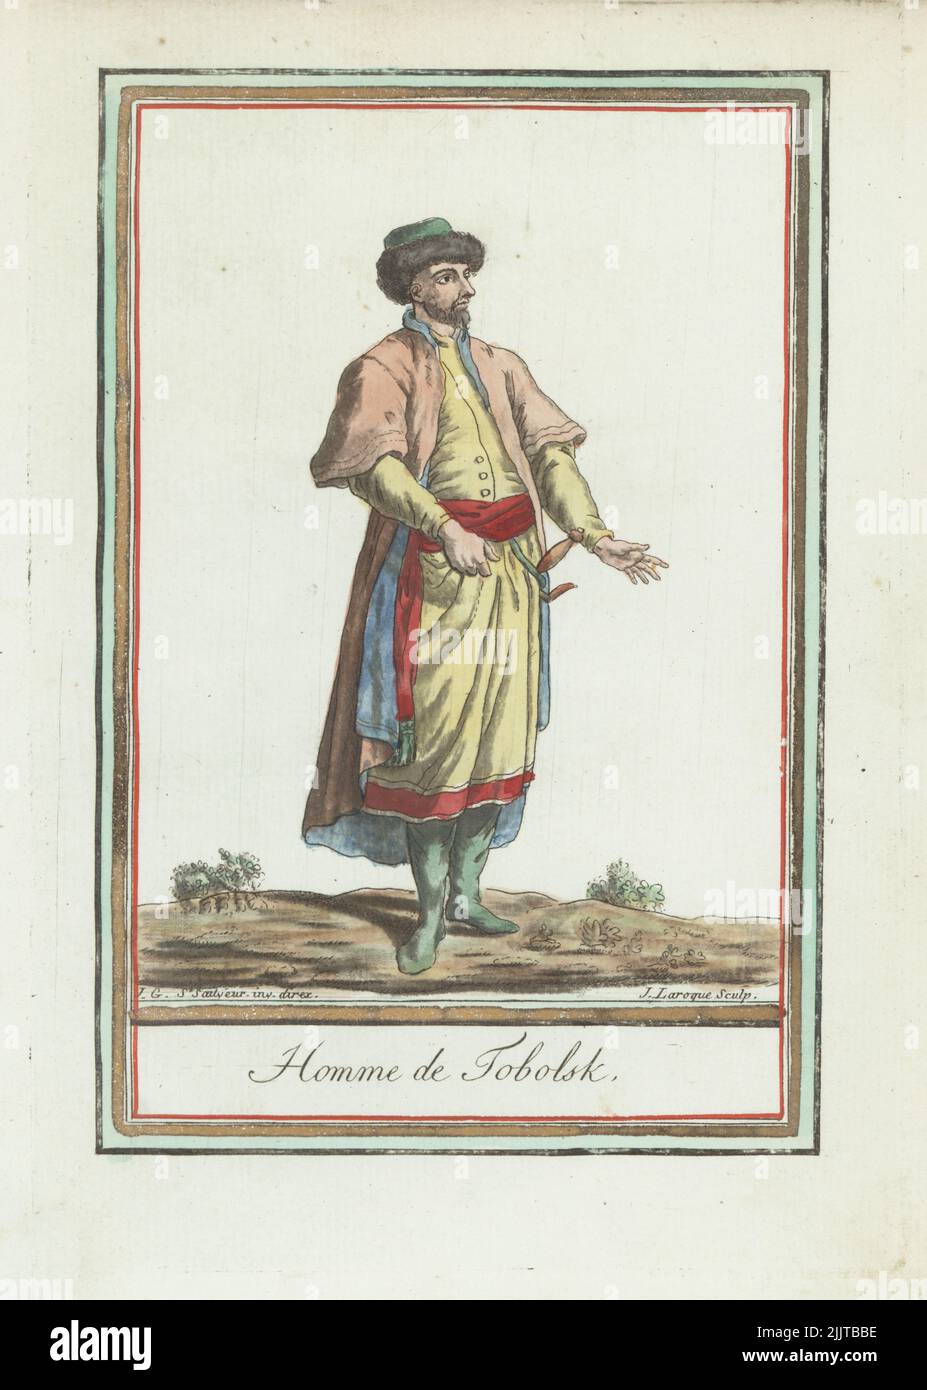 Tatar man of Tobolsky. In fur hat, short-sleeve coat, tunic with sash belt with two scimitars, boots. Homme de Tobolsk. Handcoloured copperplate engraving by J. Laroque after a design by Jacques Grasset de Saint-Sauveur from his Encyclopedie des voyages, Encyclopedia of Voyages, Bordeaux, France, 1792. Stock Photo